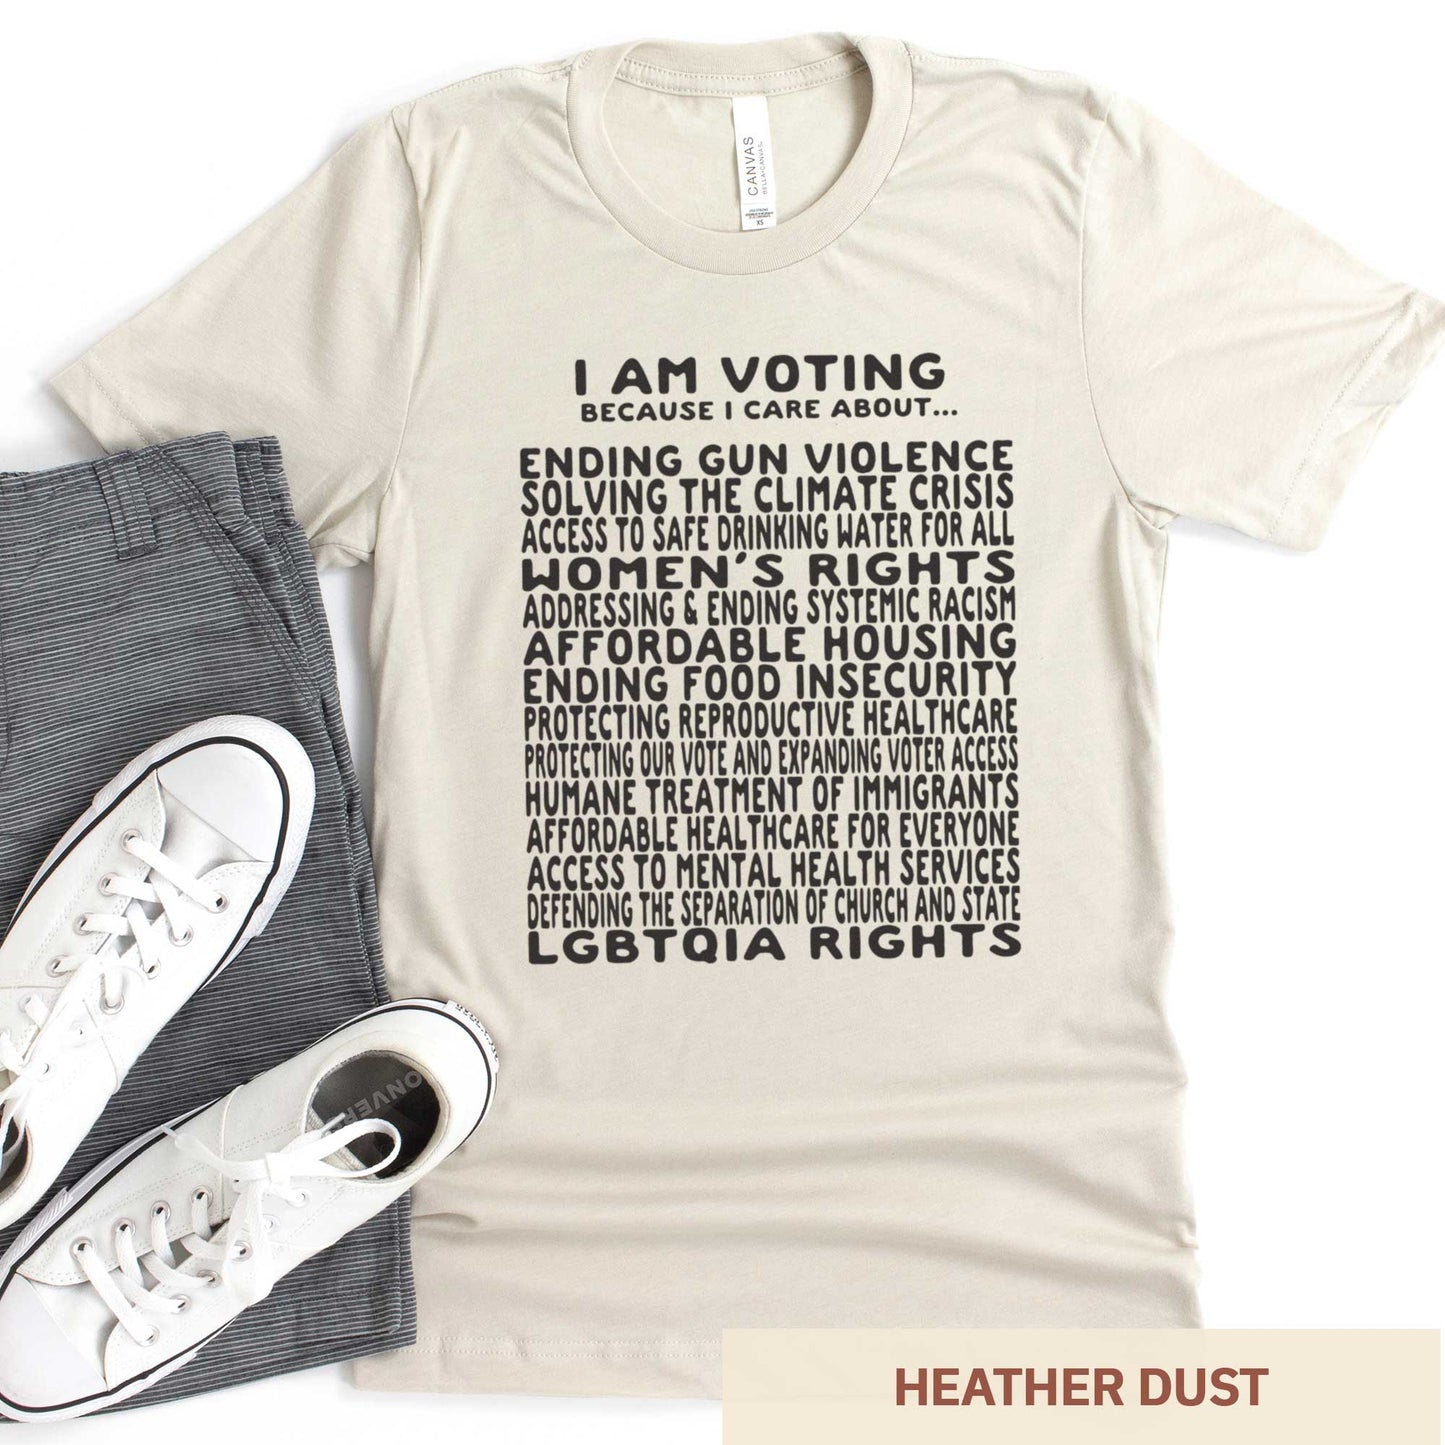 A heather dust Bella Canvas t-shirt featuring a long list of issues to vote on.